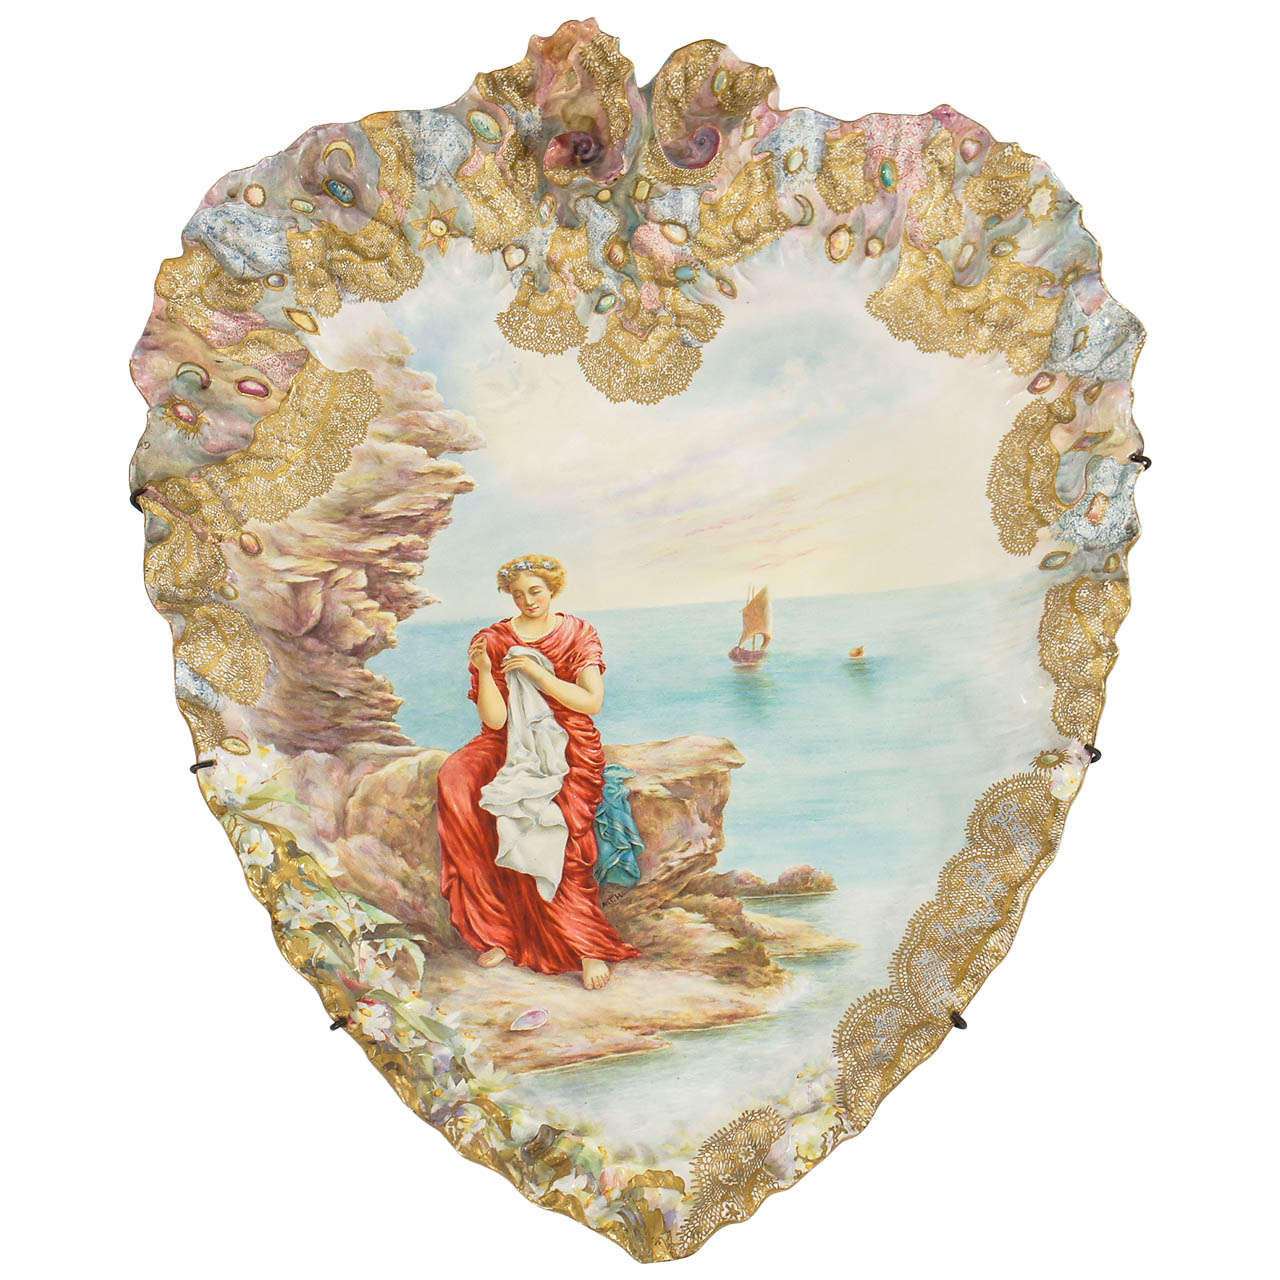 19th Century Porcelain Plaque with Hand-Painted Plaque by Turner